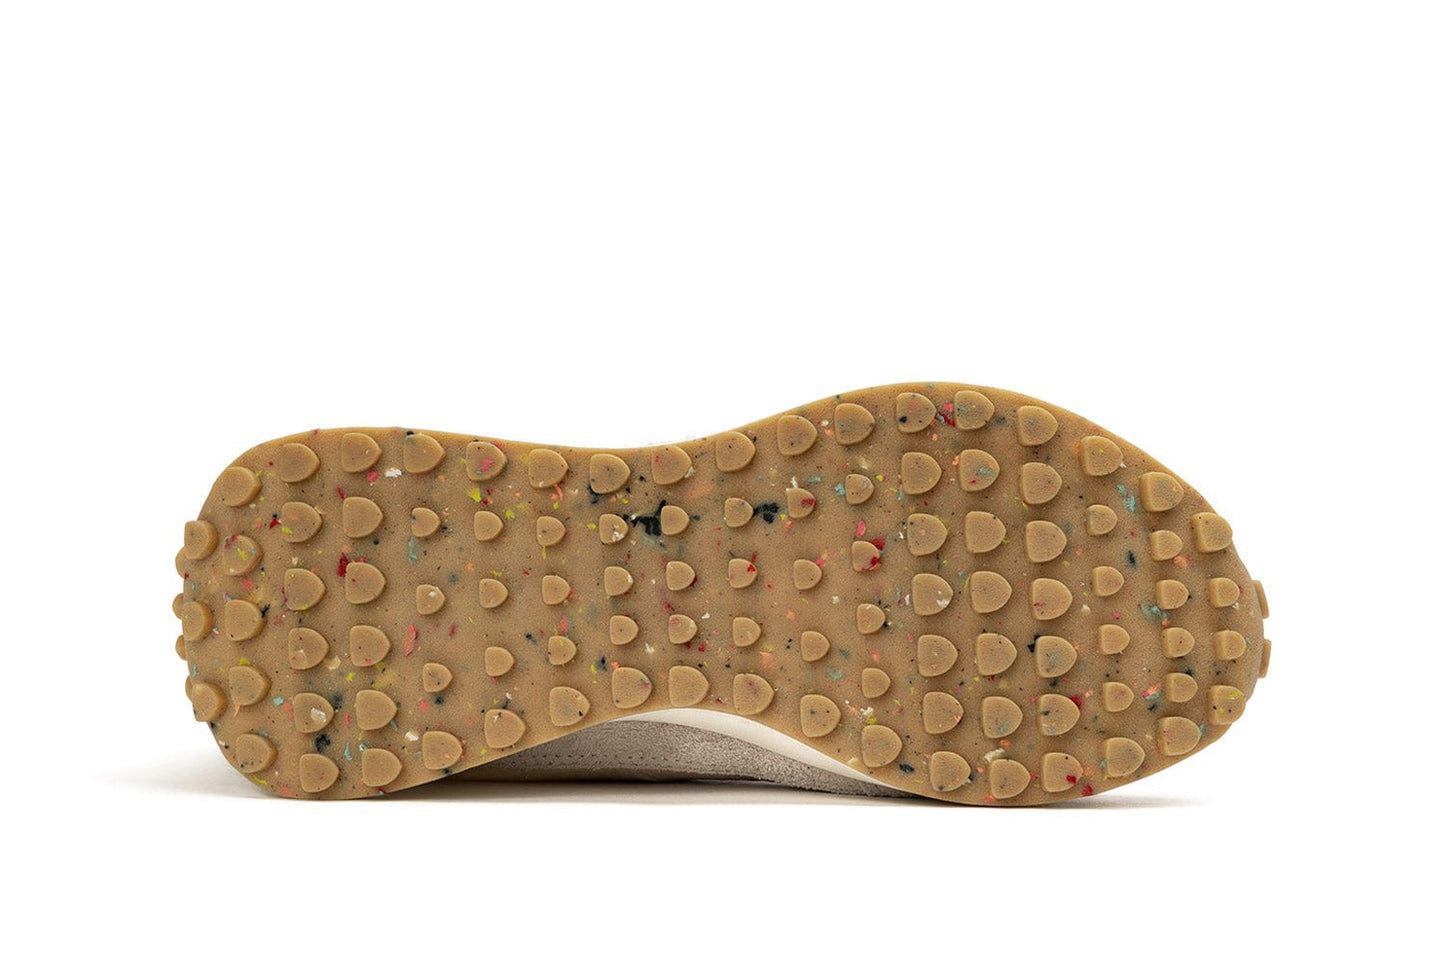 View of the sole of the Acorn Trainer, showcasing a sole made from recycled materials.